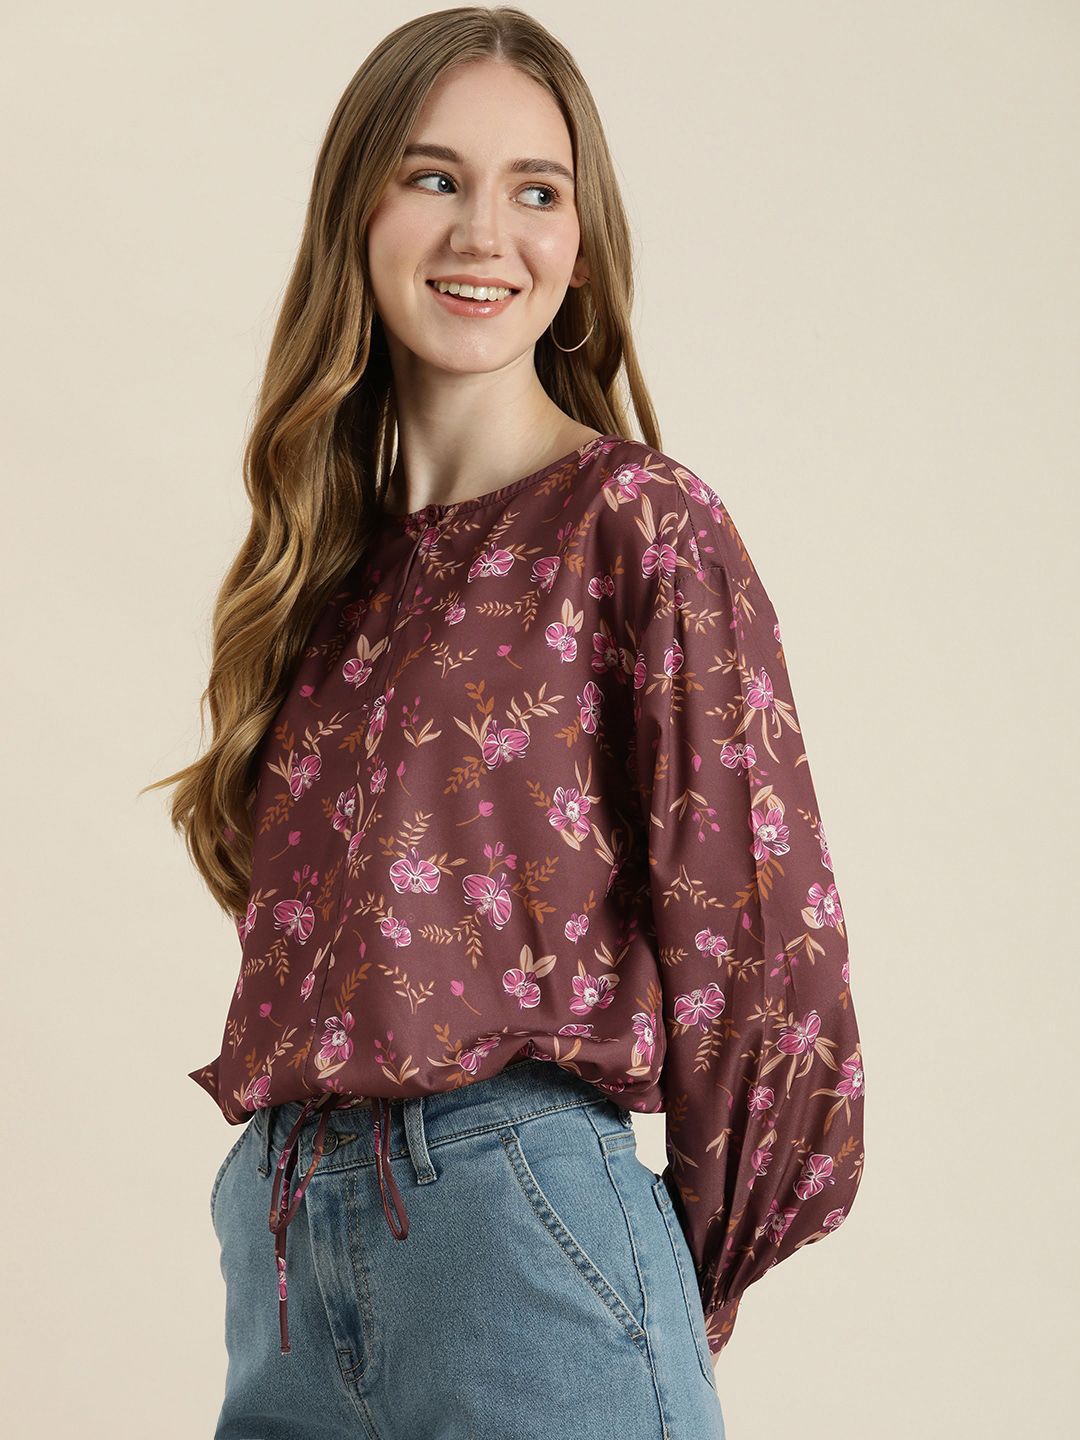 encore by INVICTUS Round Neck Floral Printed Blouson Top Price in India